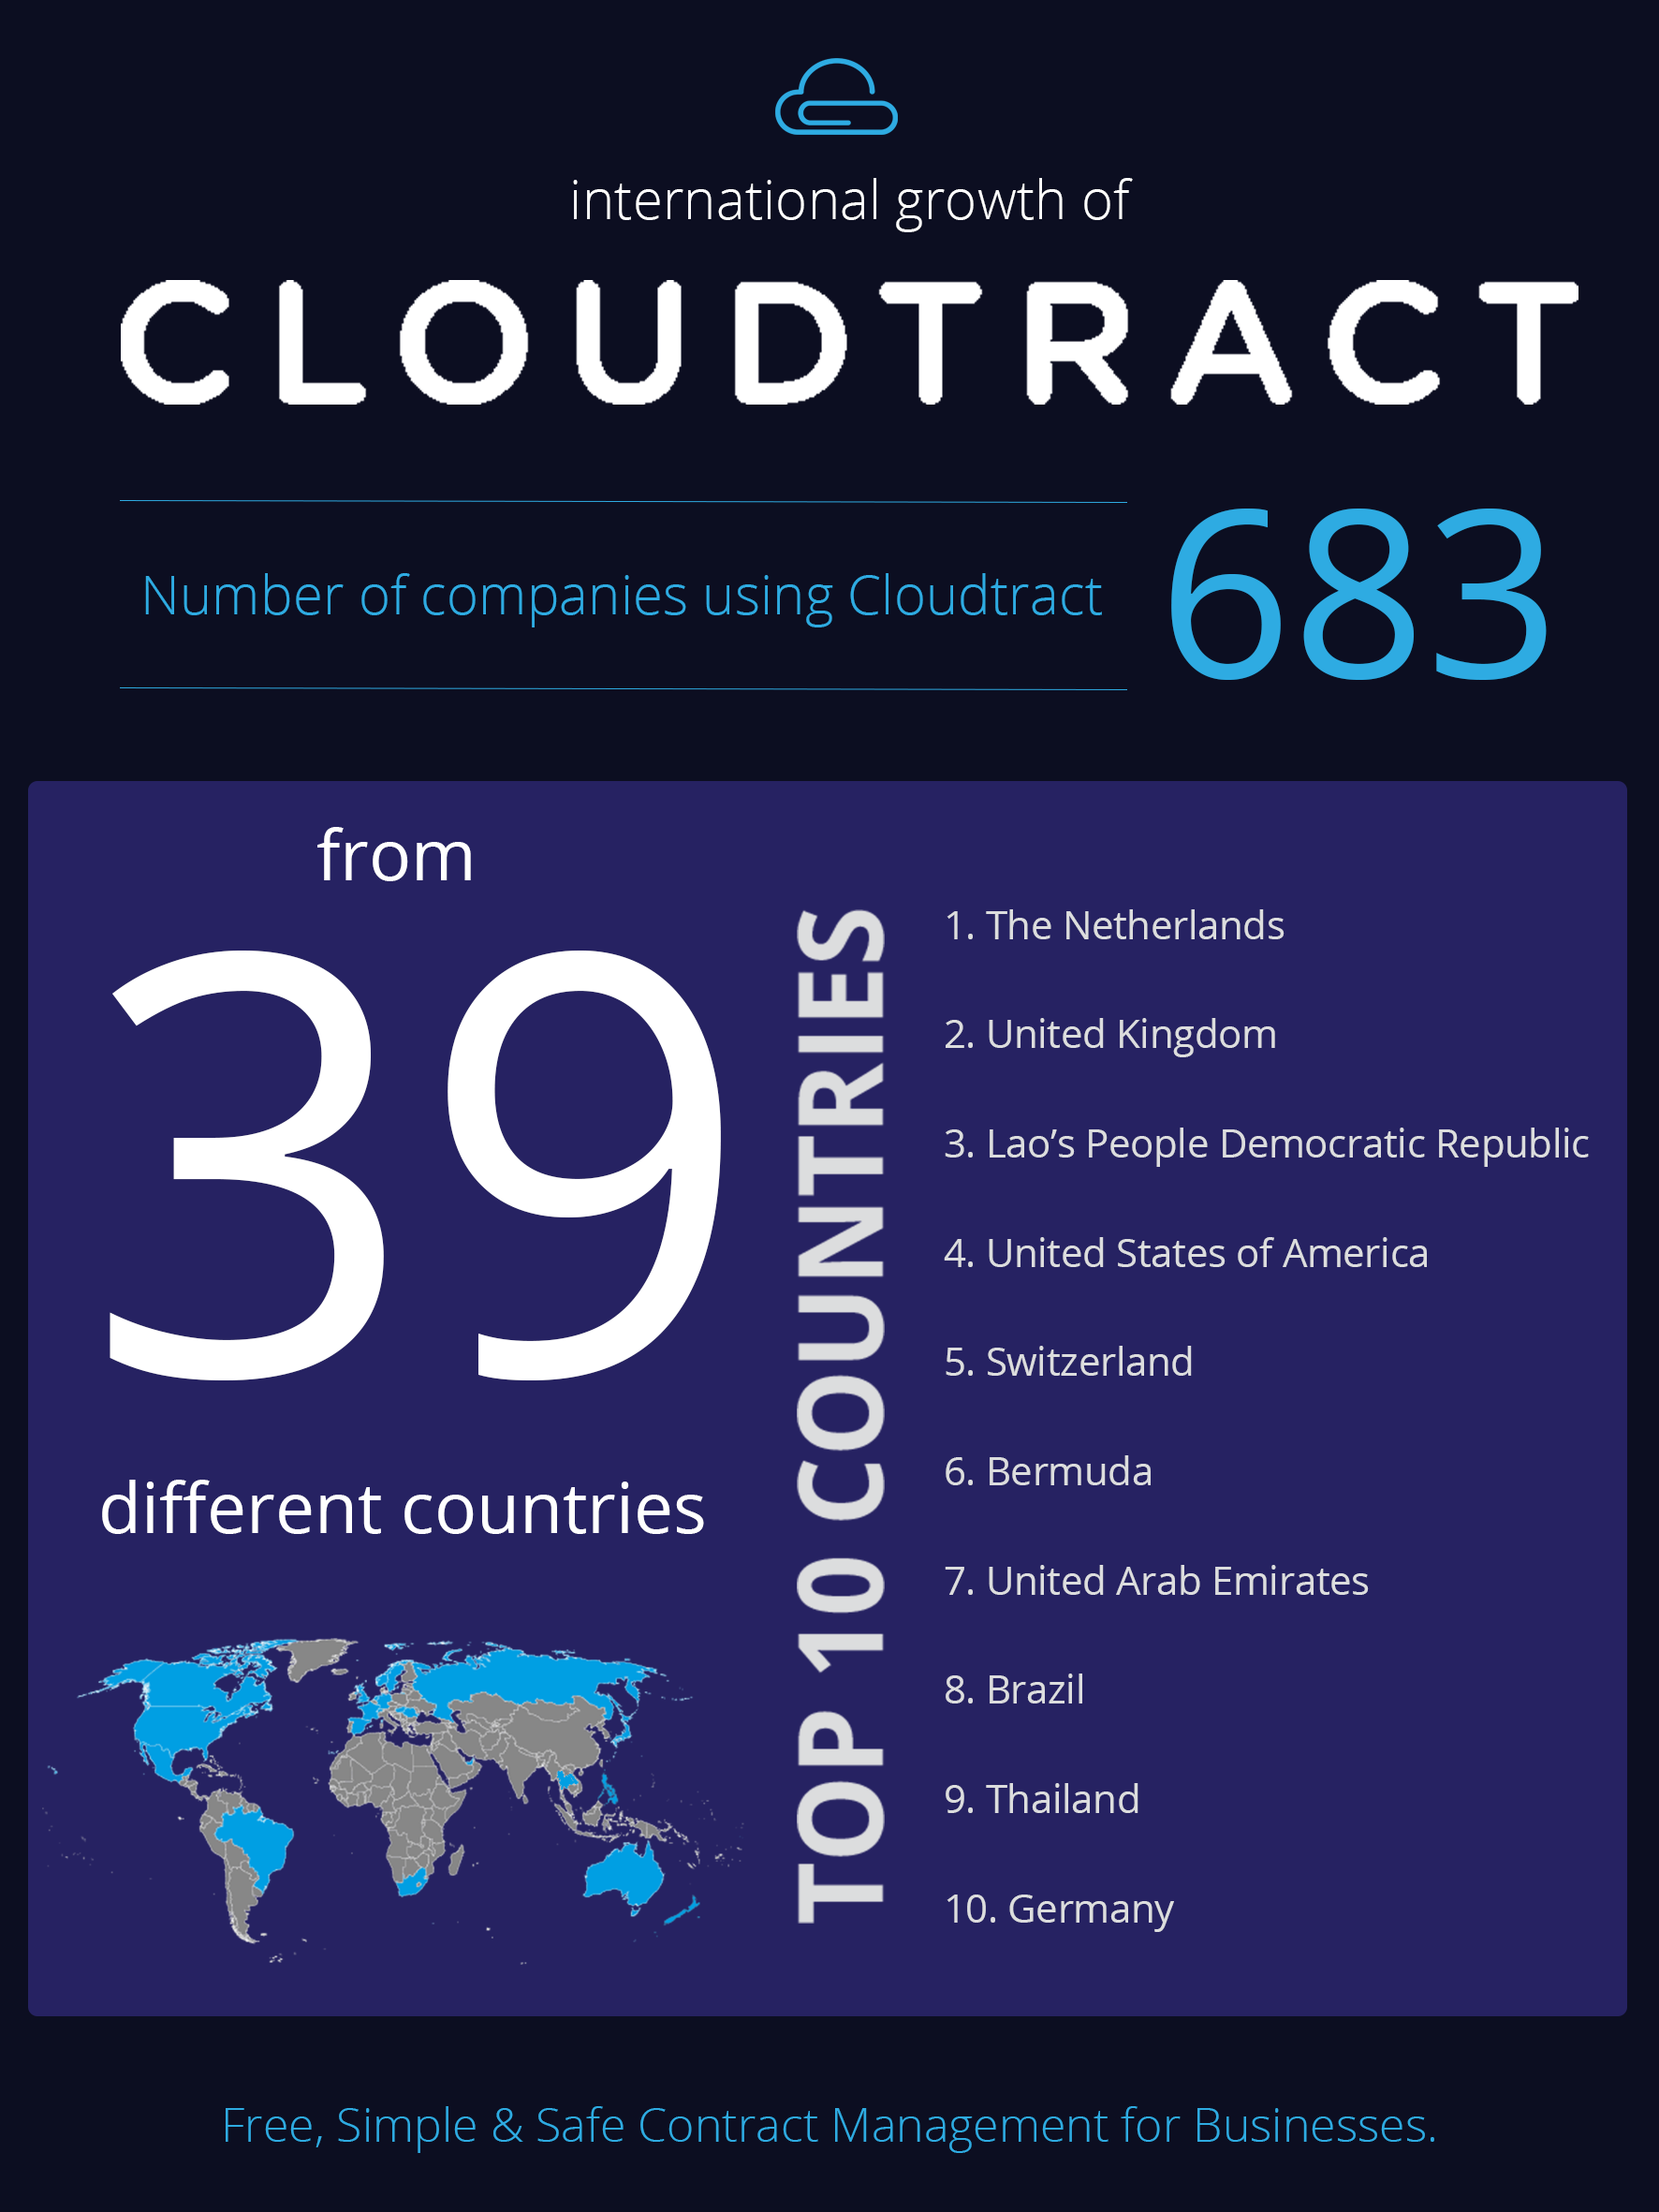 Cloudtract Infographic numer of countries and users 20150407